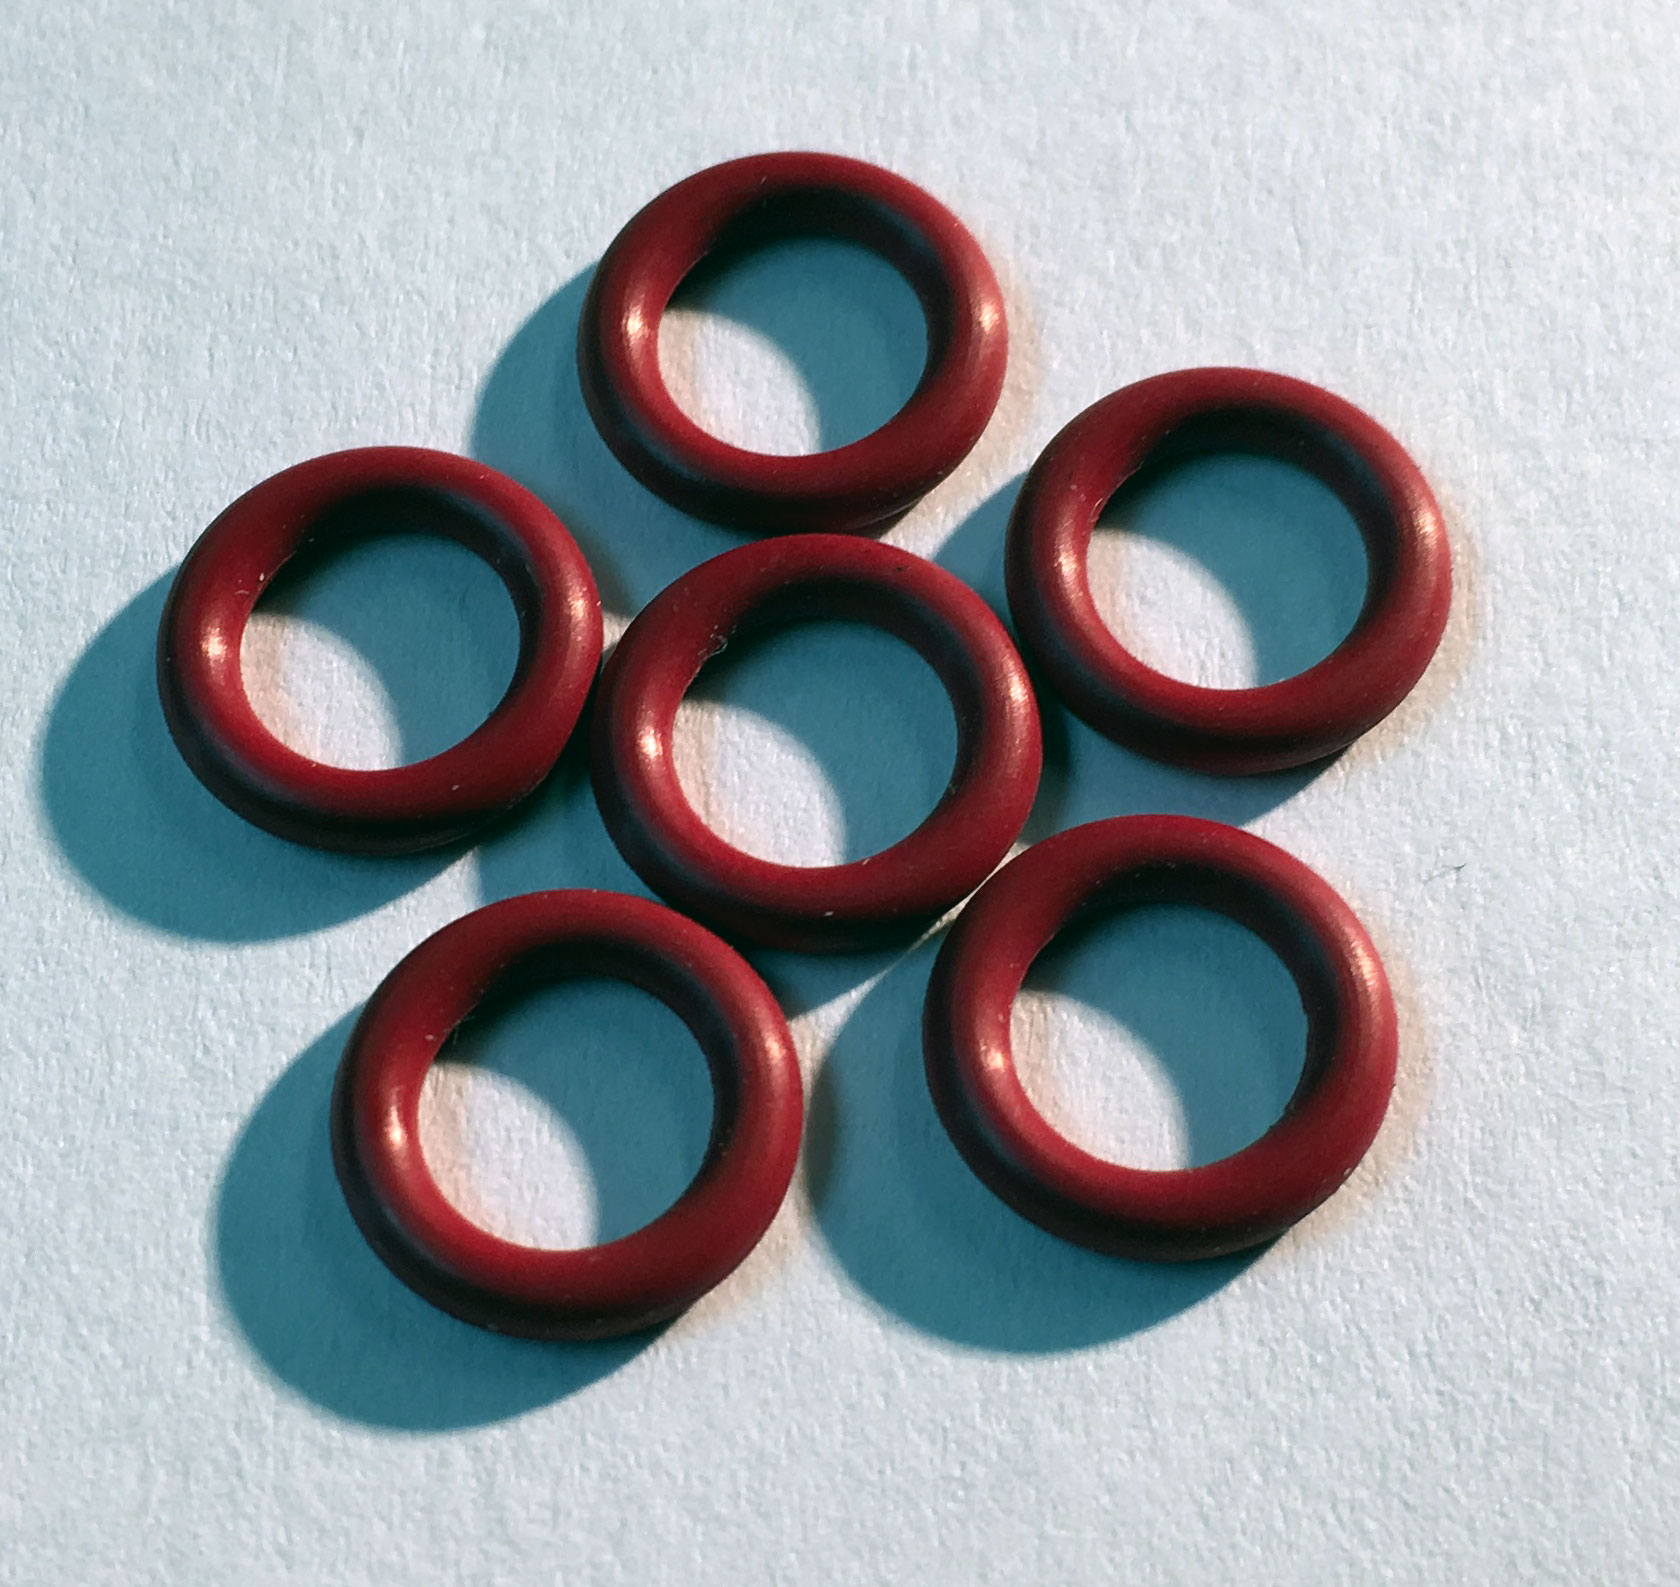 O-rings for Mouthpiece Tenons